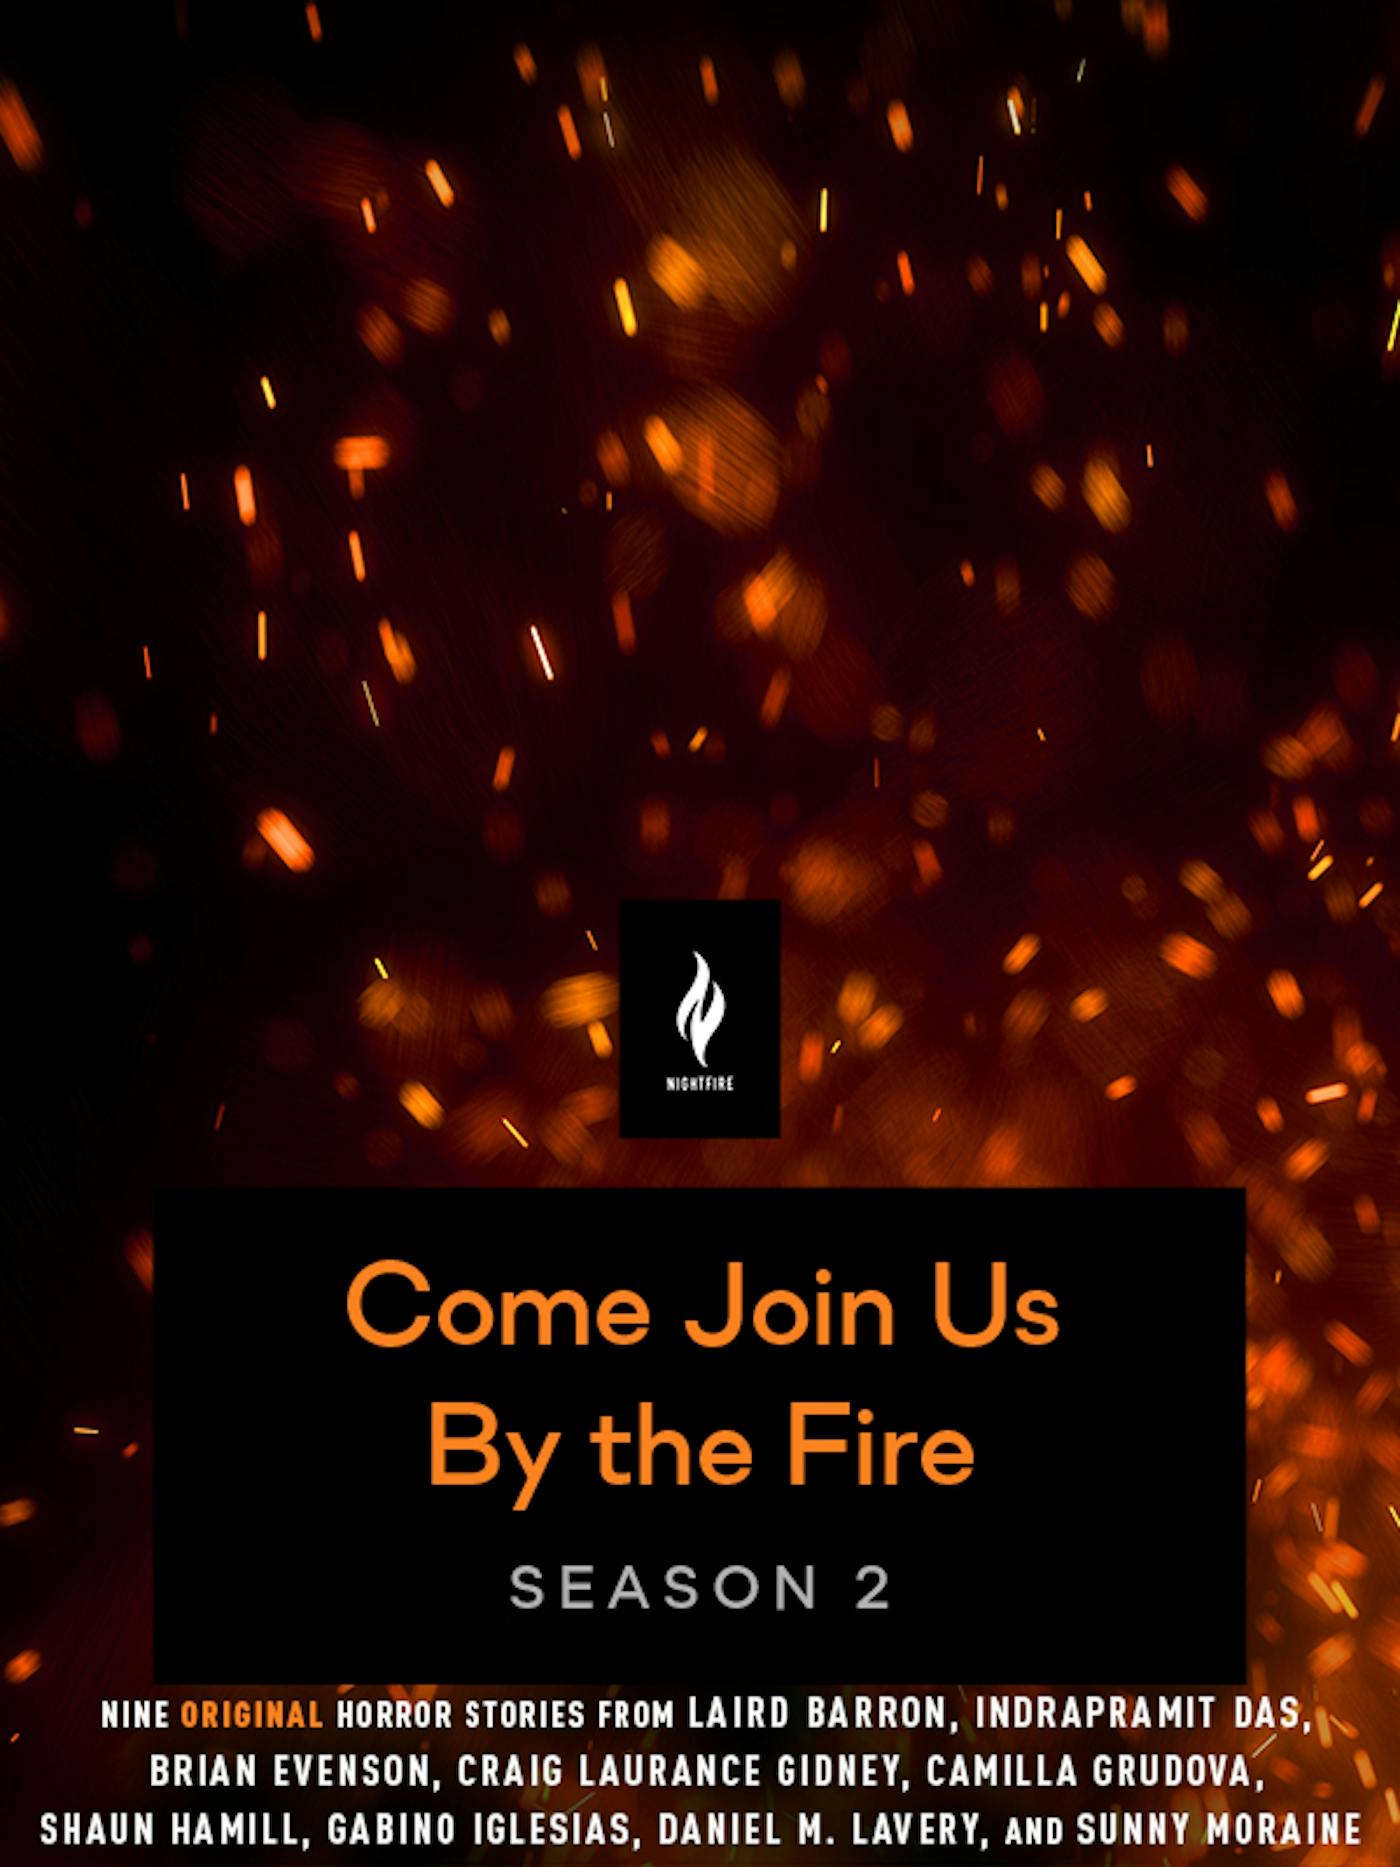 Cover for the book titled as: Come Join Us By the Fire Season 2